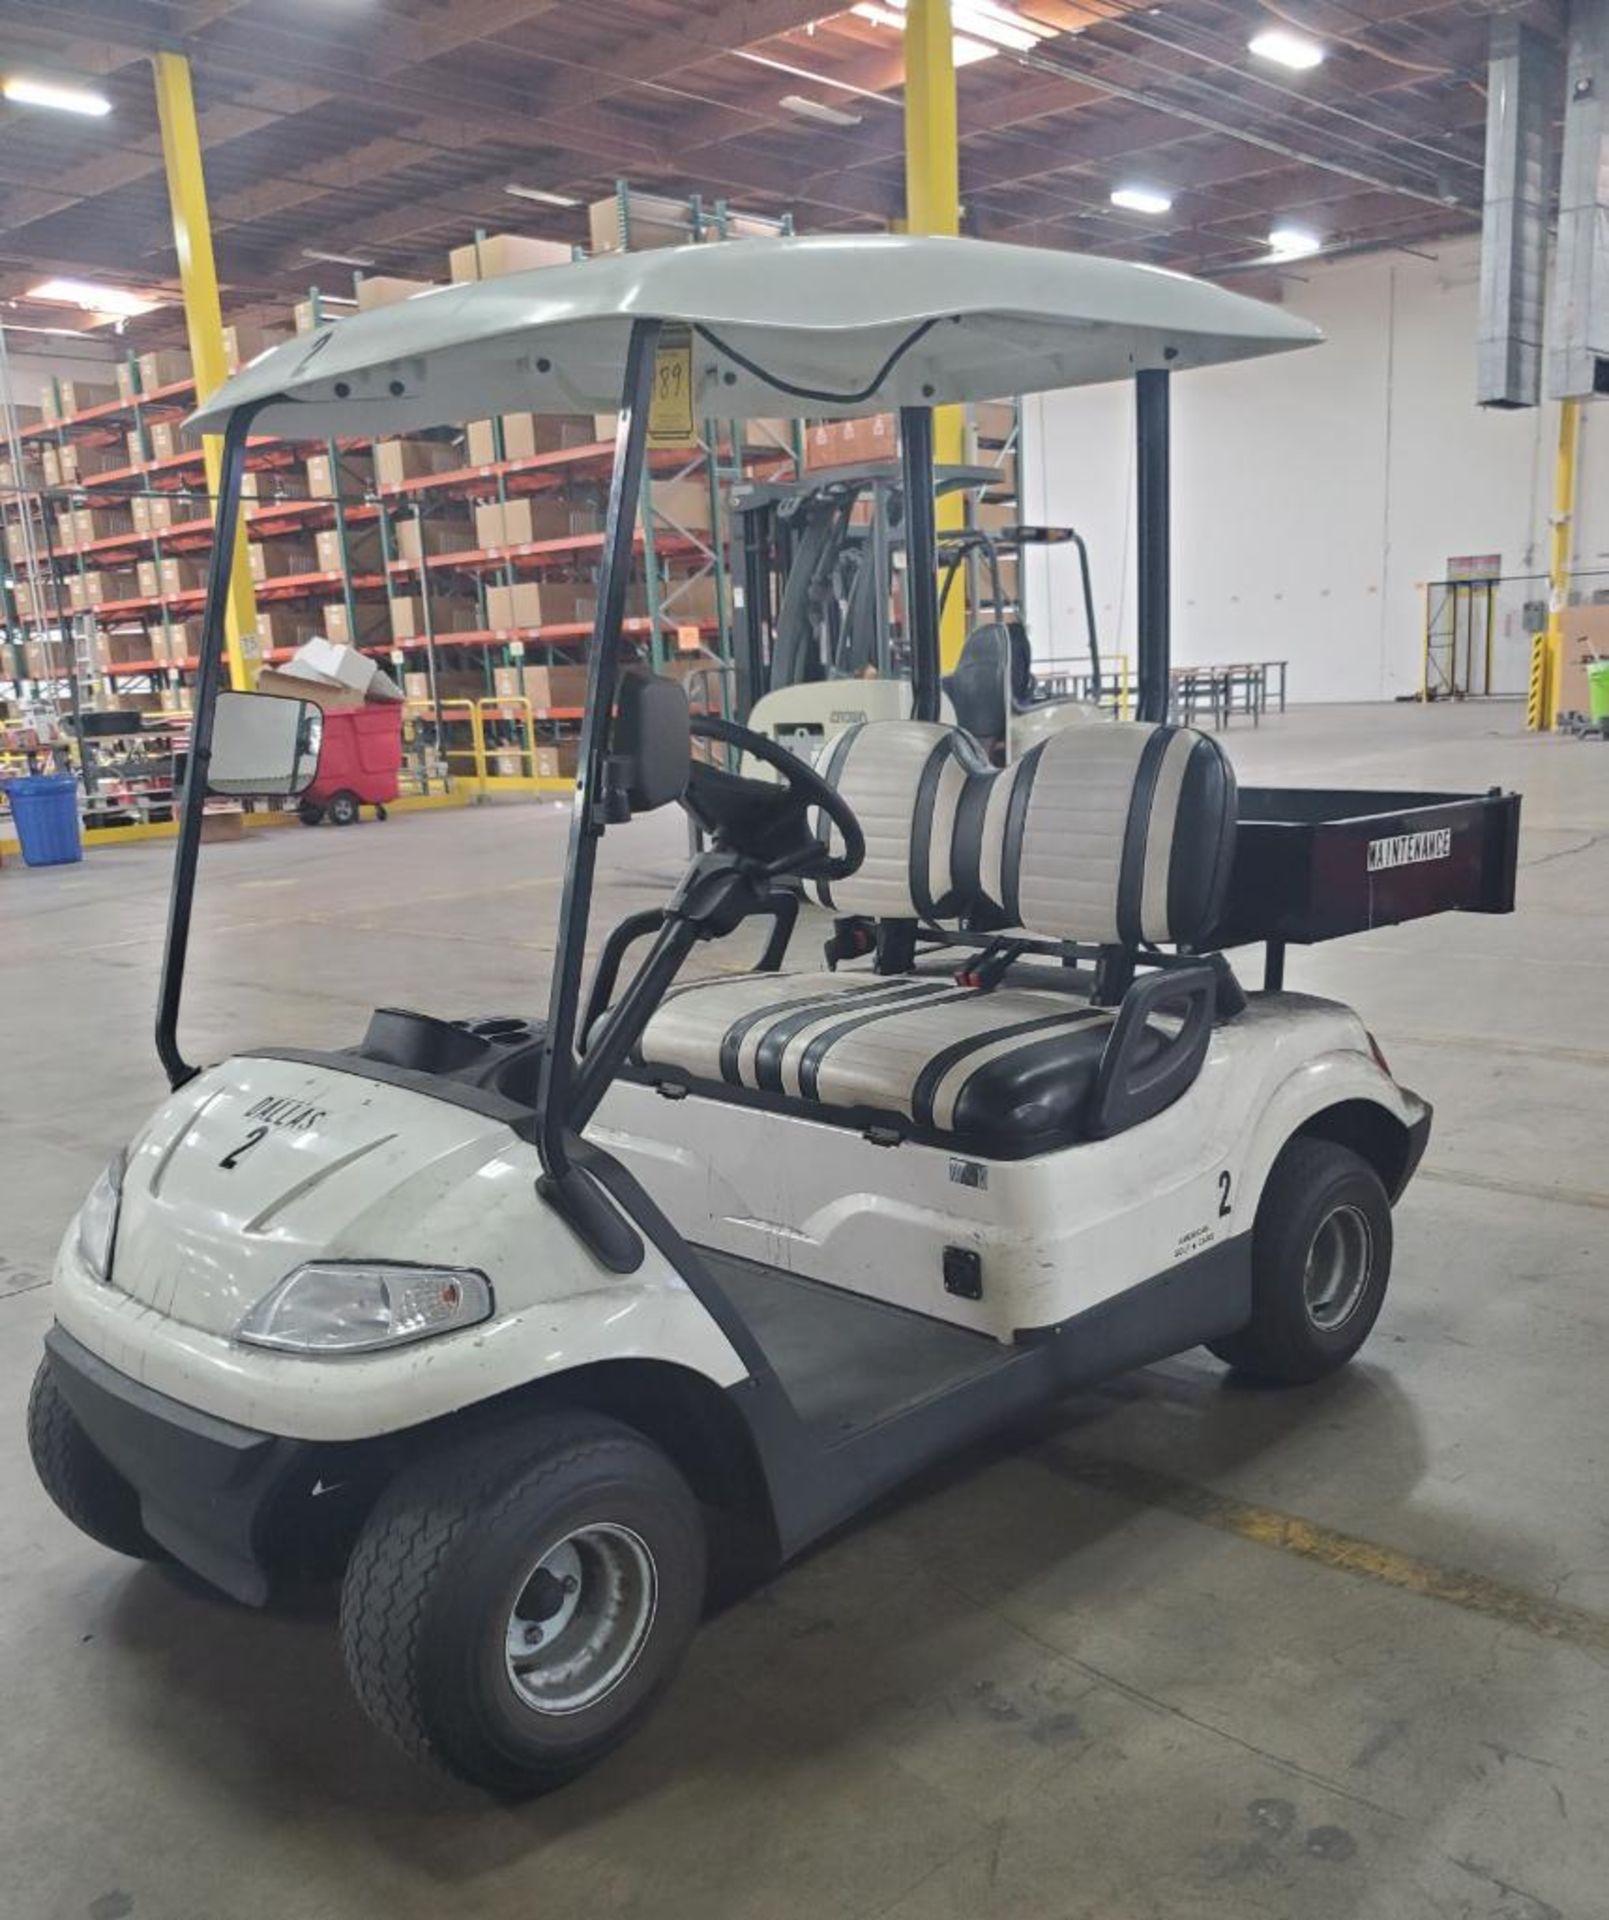 AMERICAN GOLF CART; MODEL LT-A627.2, S/N LTA0016635, MAX RATED SPEED 25-MPH, STATIONARY BED, CANOPY - Image 2 of 8